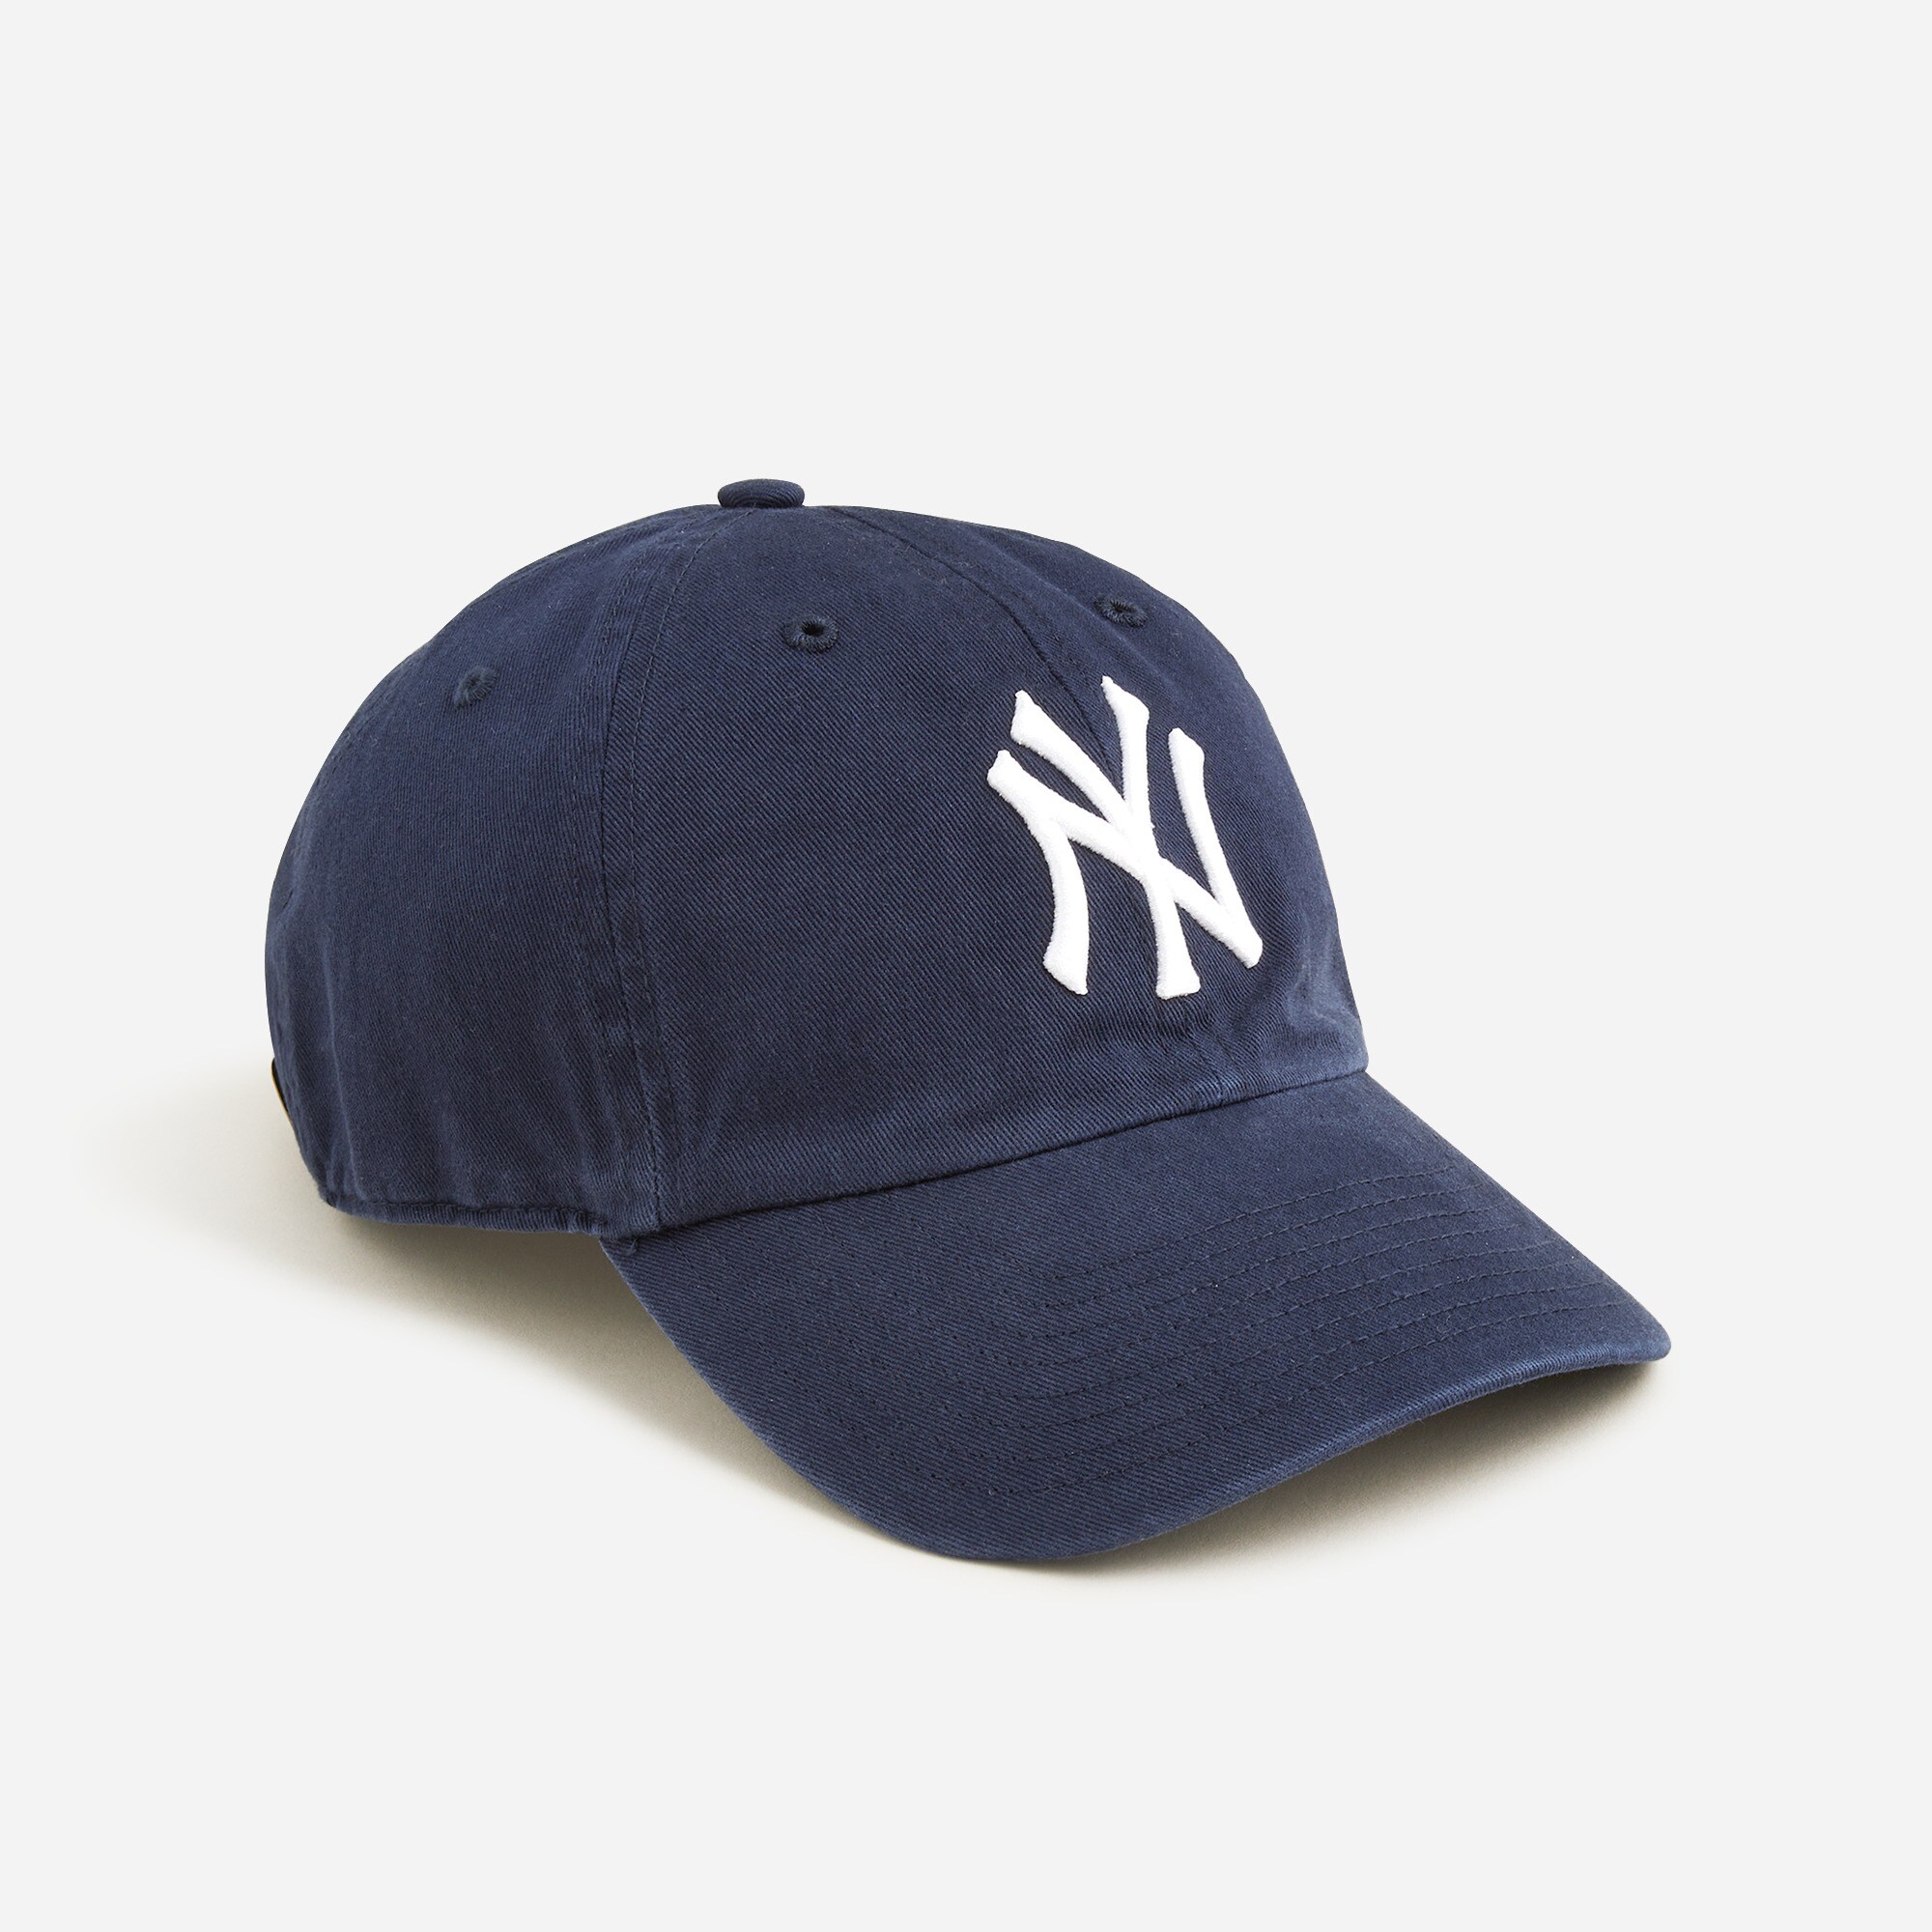 boys '47 Brand kids' cleanup cap in garment-dyed twill